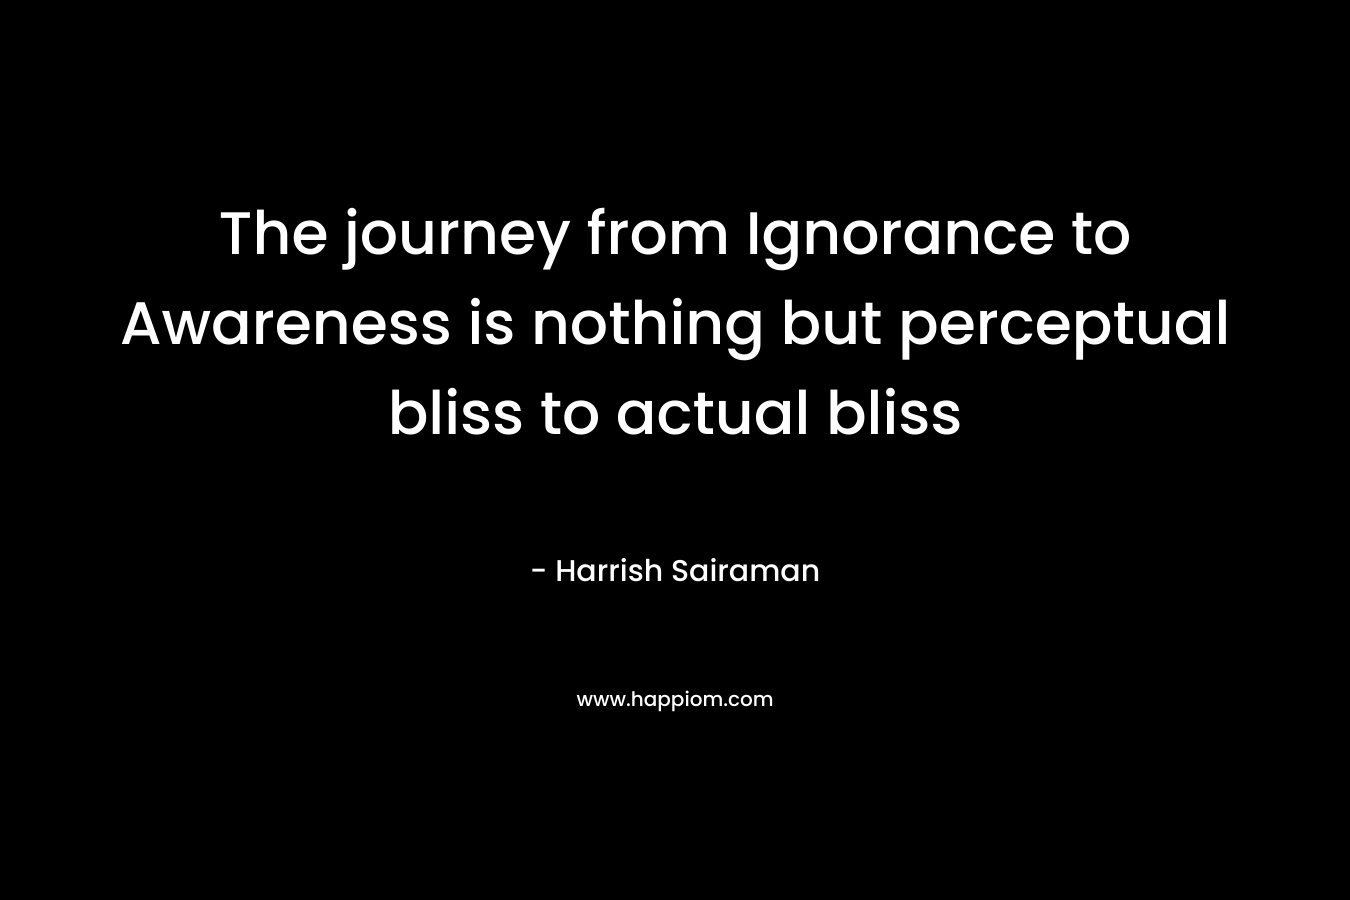 The journey from Ignorance to Awareness is nothing but perceptual bliss to actual bliss